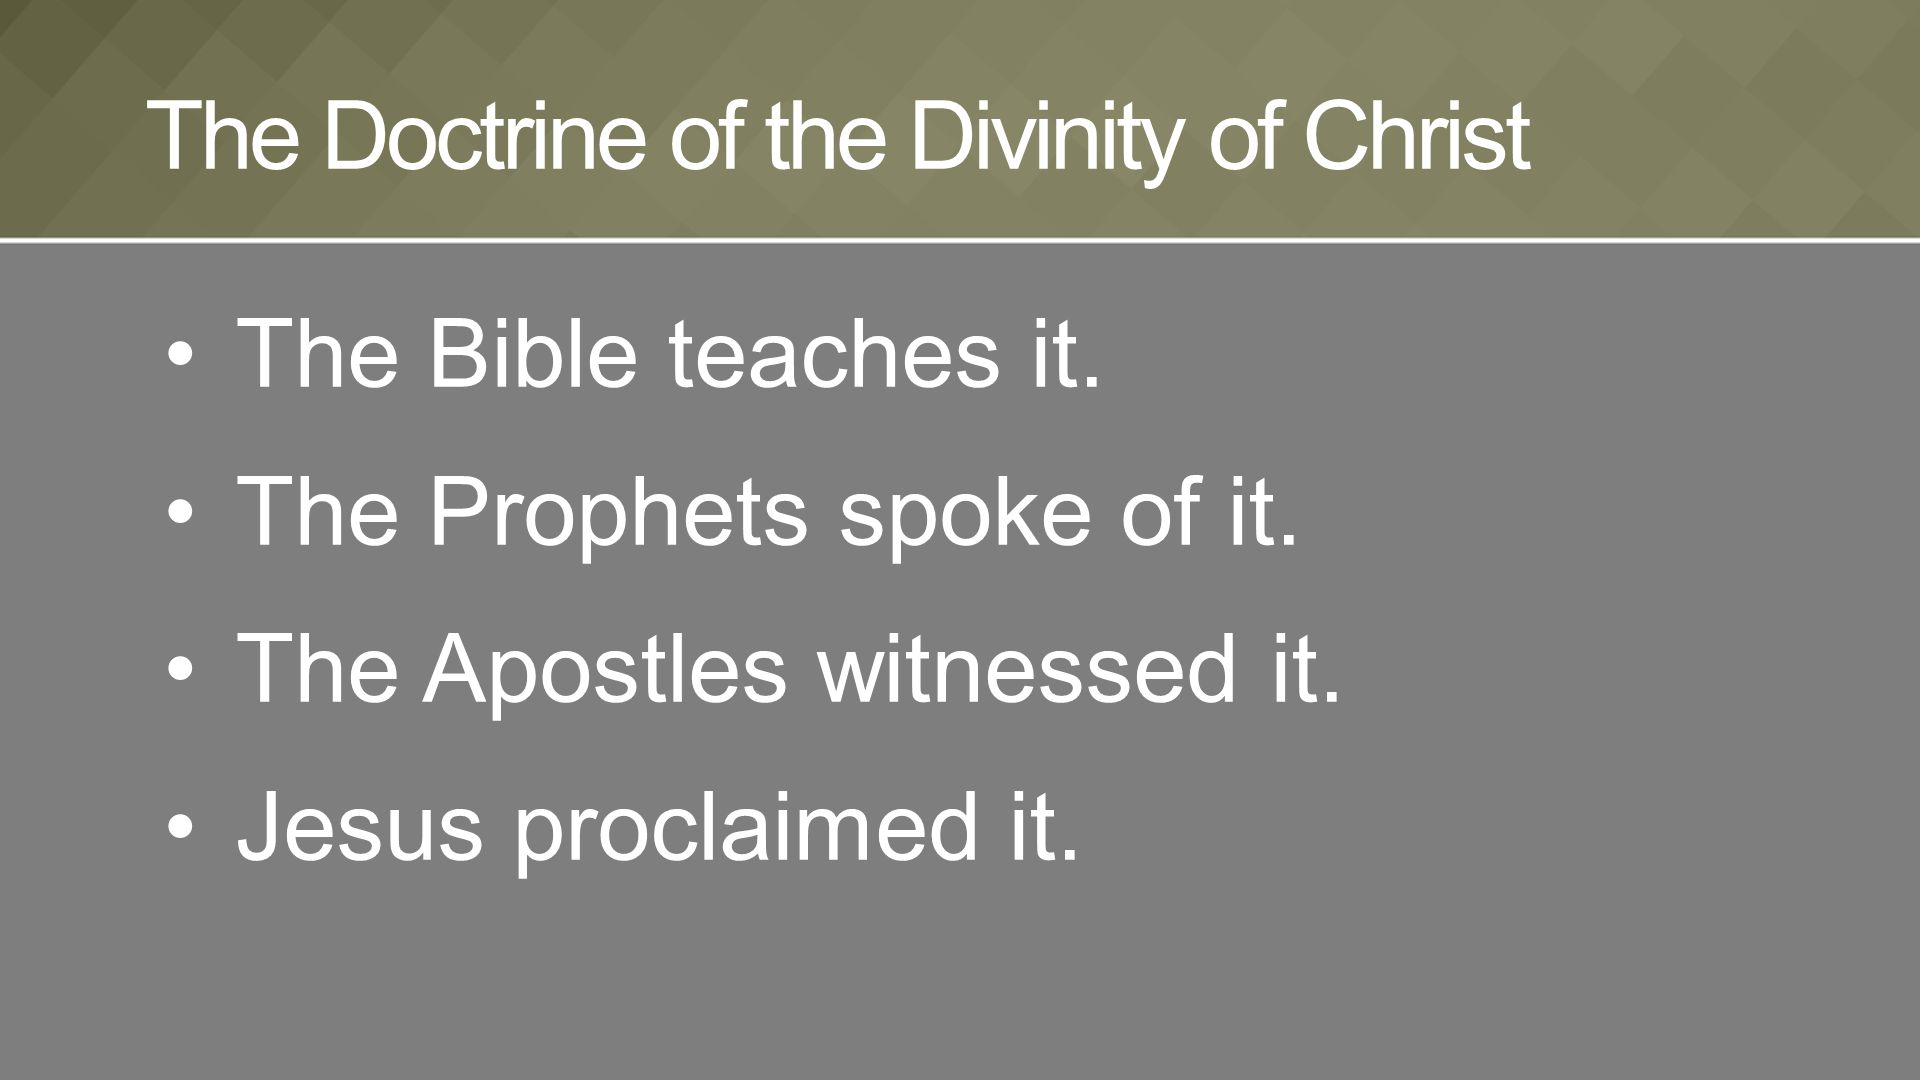 The Bible teaches it. The Prophets spoke of it. The Apostles witnessed it.